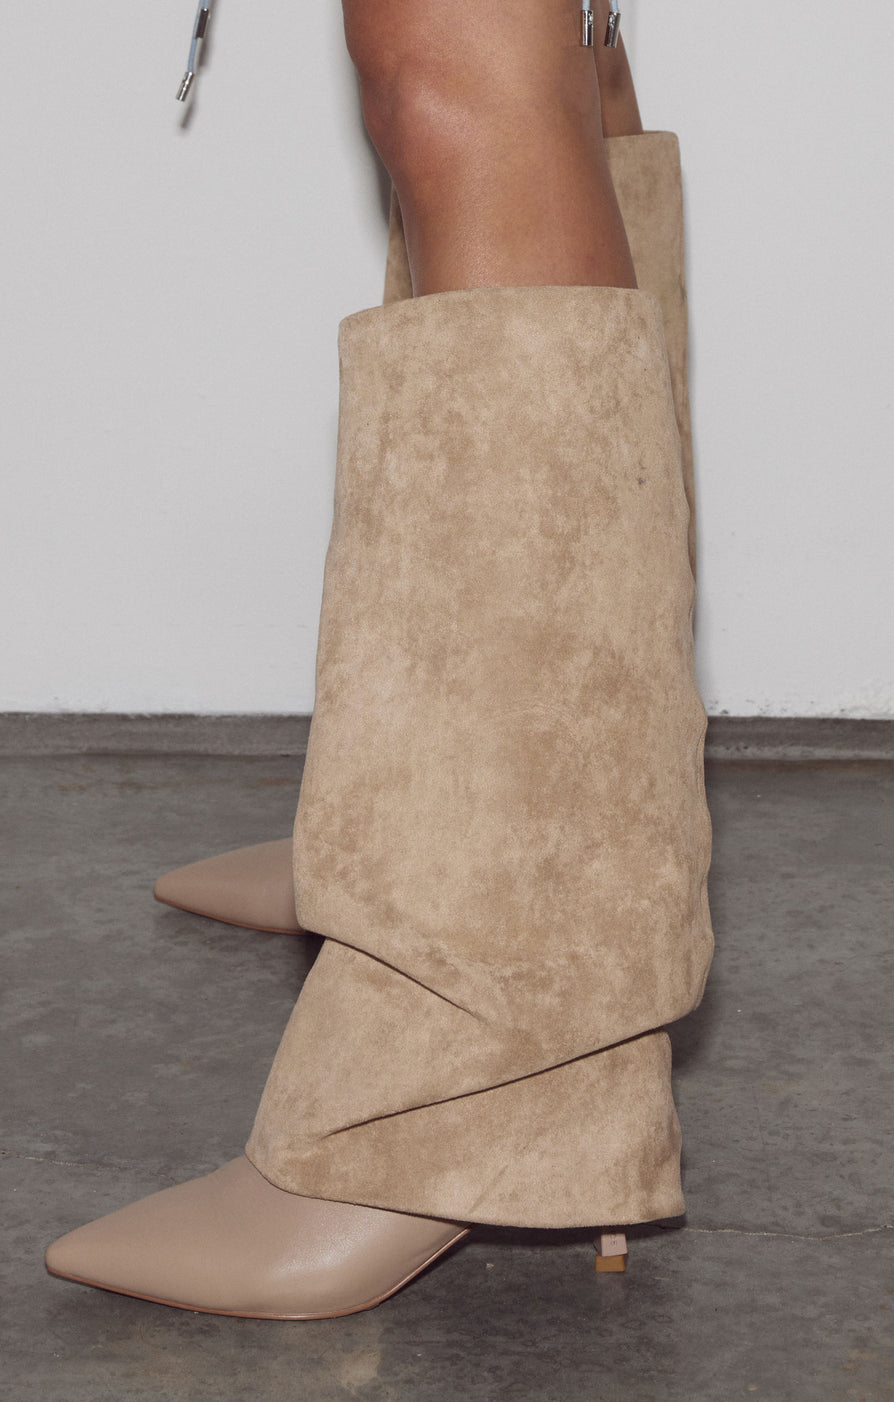 THE SIA SAND BOOT